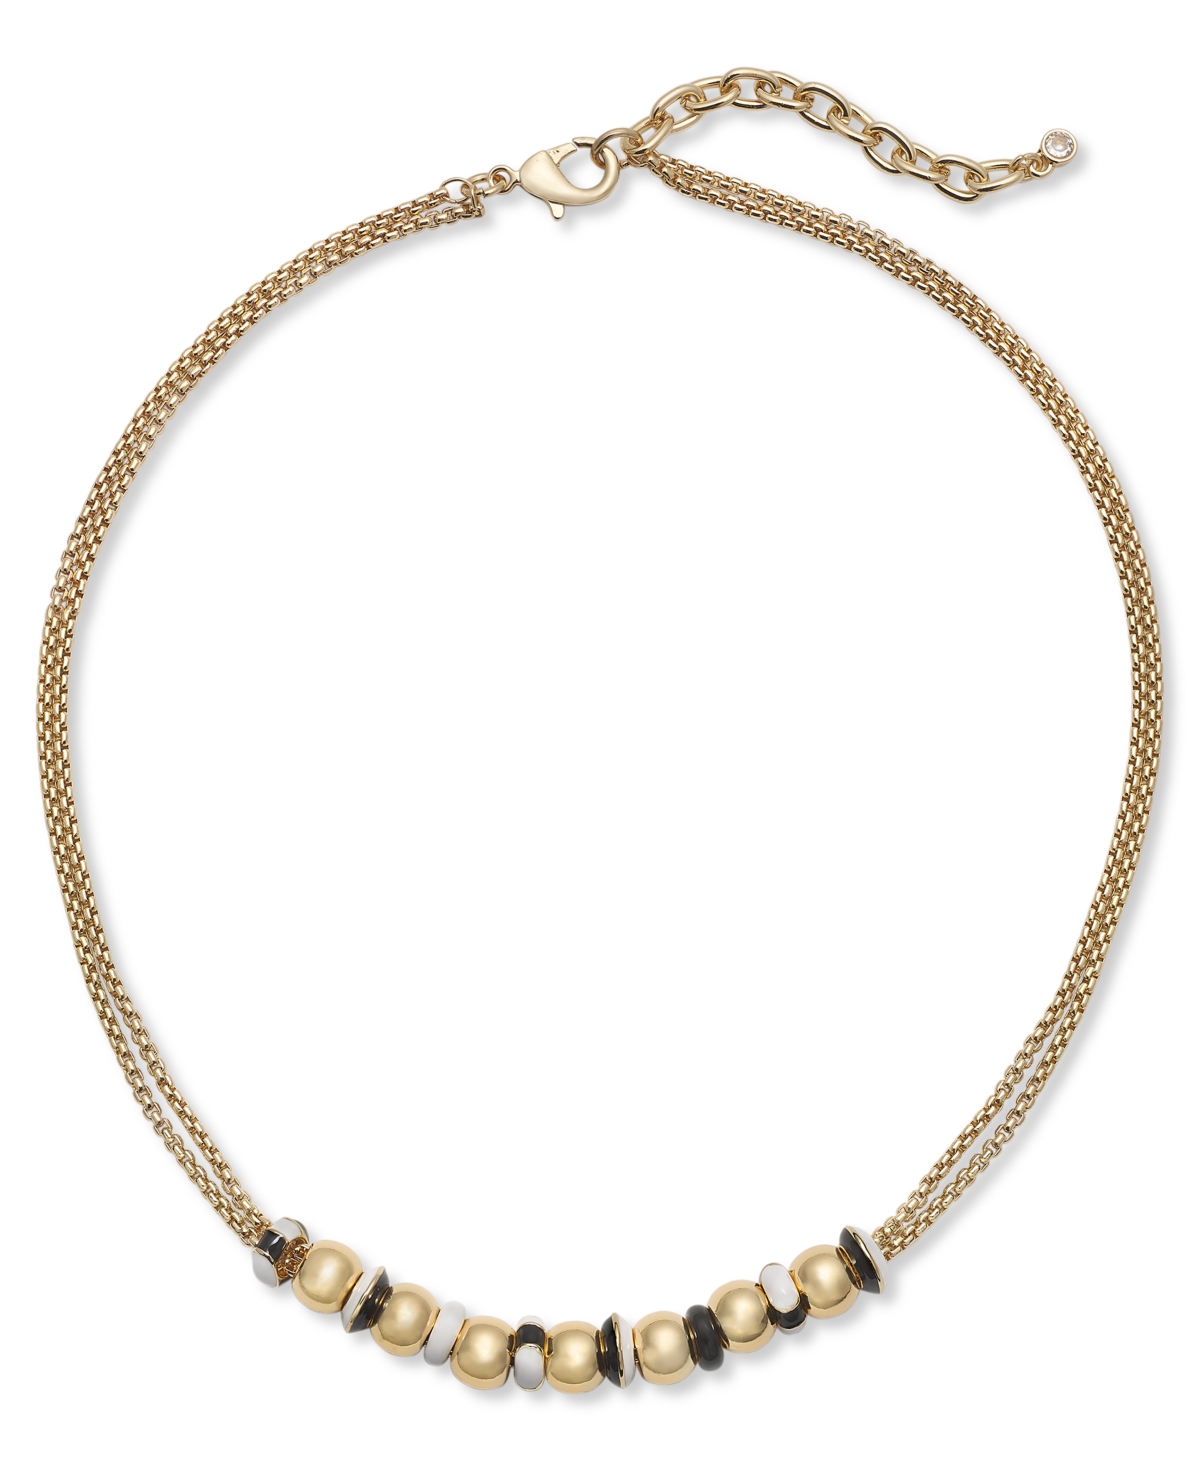 Gold-Tone Mixed Bead Double Chain Necklace, 16" + 2" extender, Created for Macy's - Gold